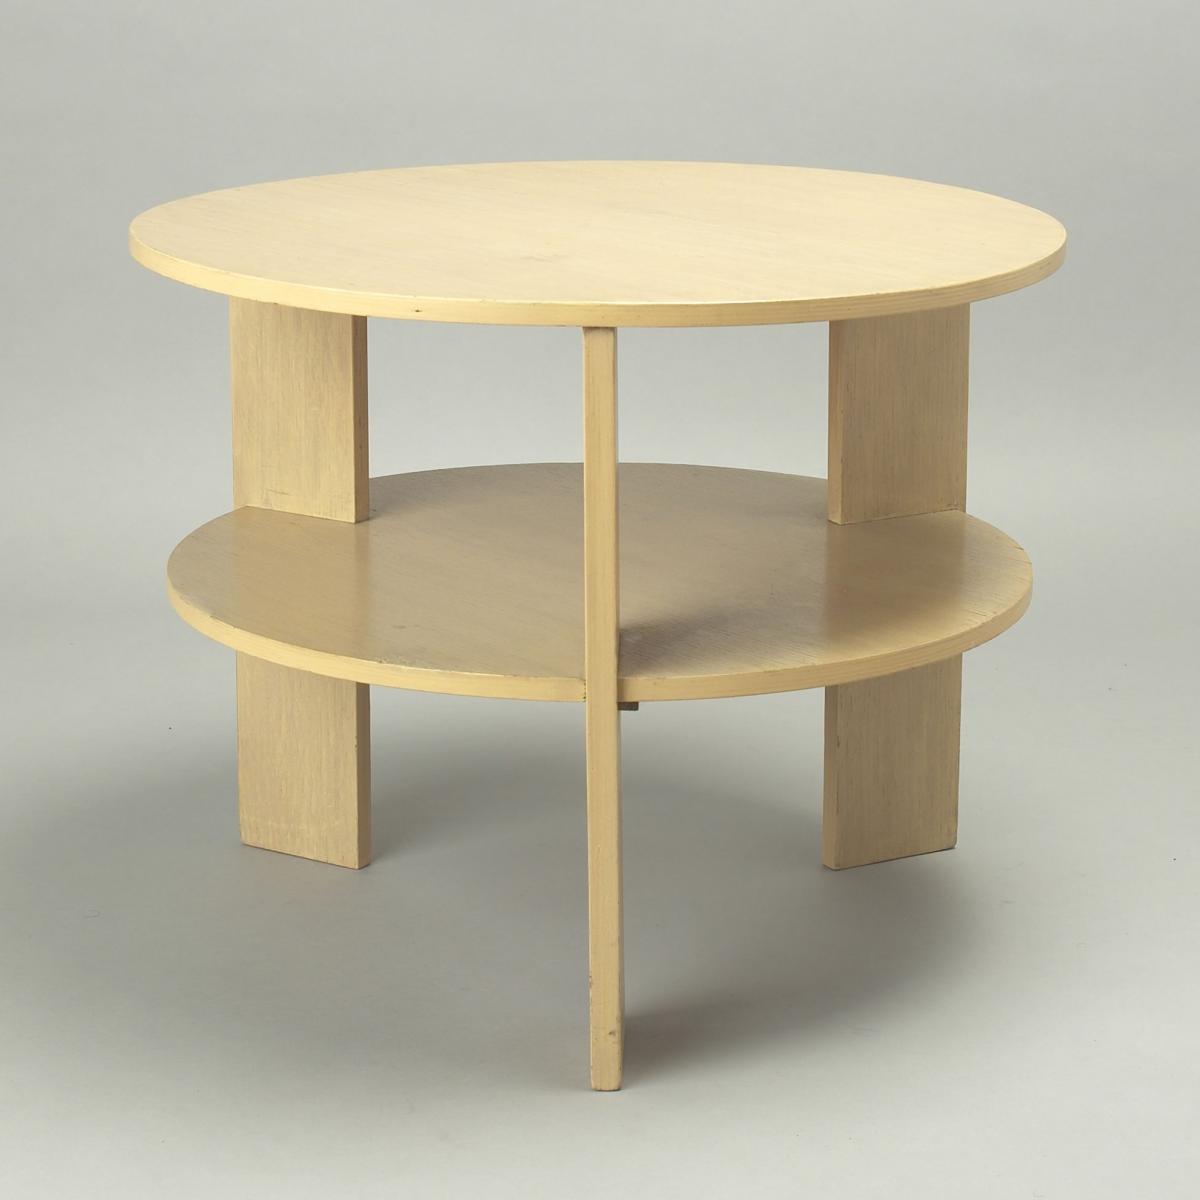 Gerald Summers Plywood Table Made by Makers of Simple Furniture (1931-1940)